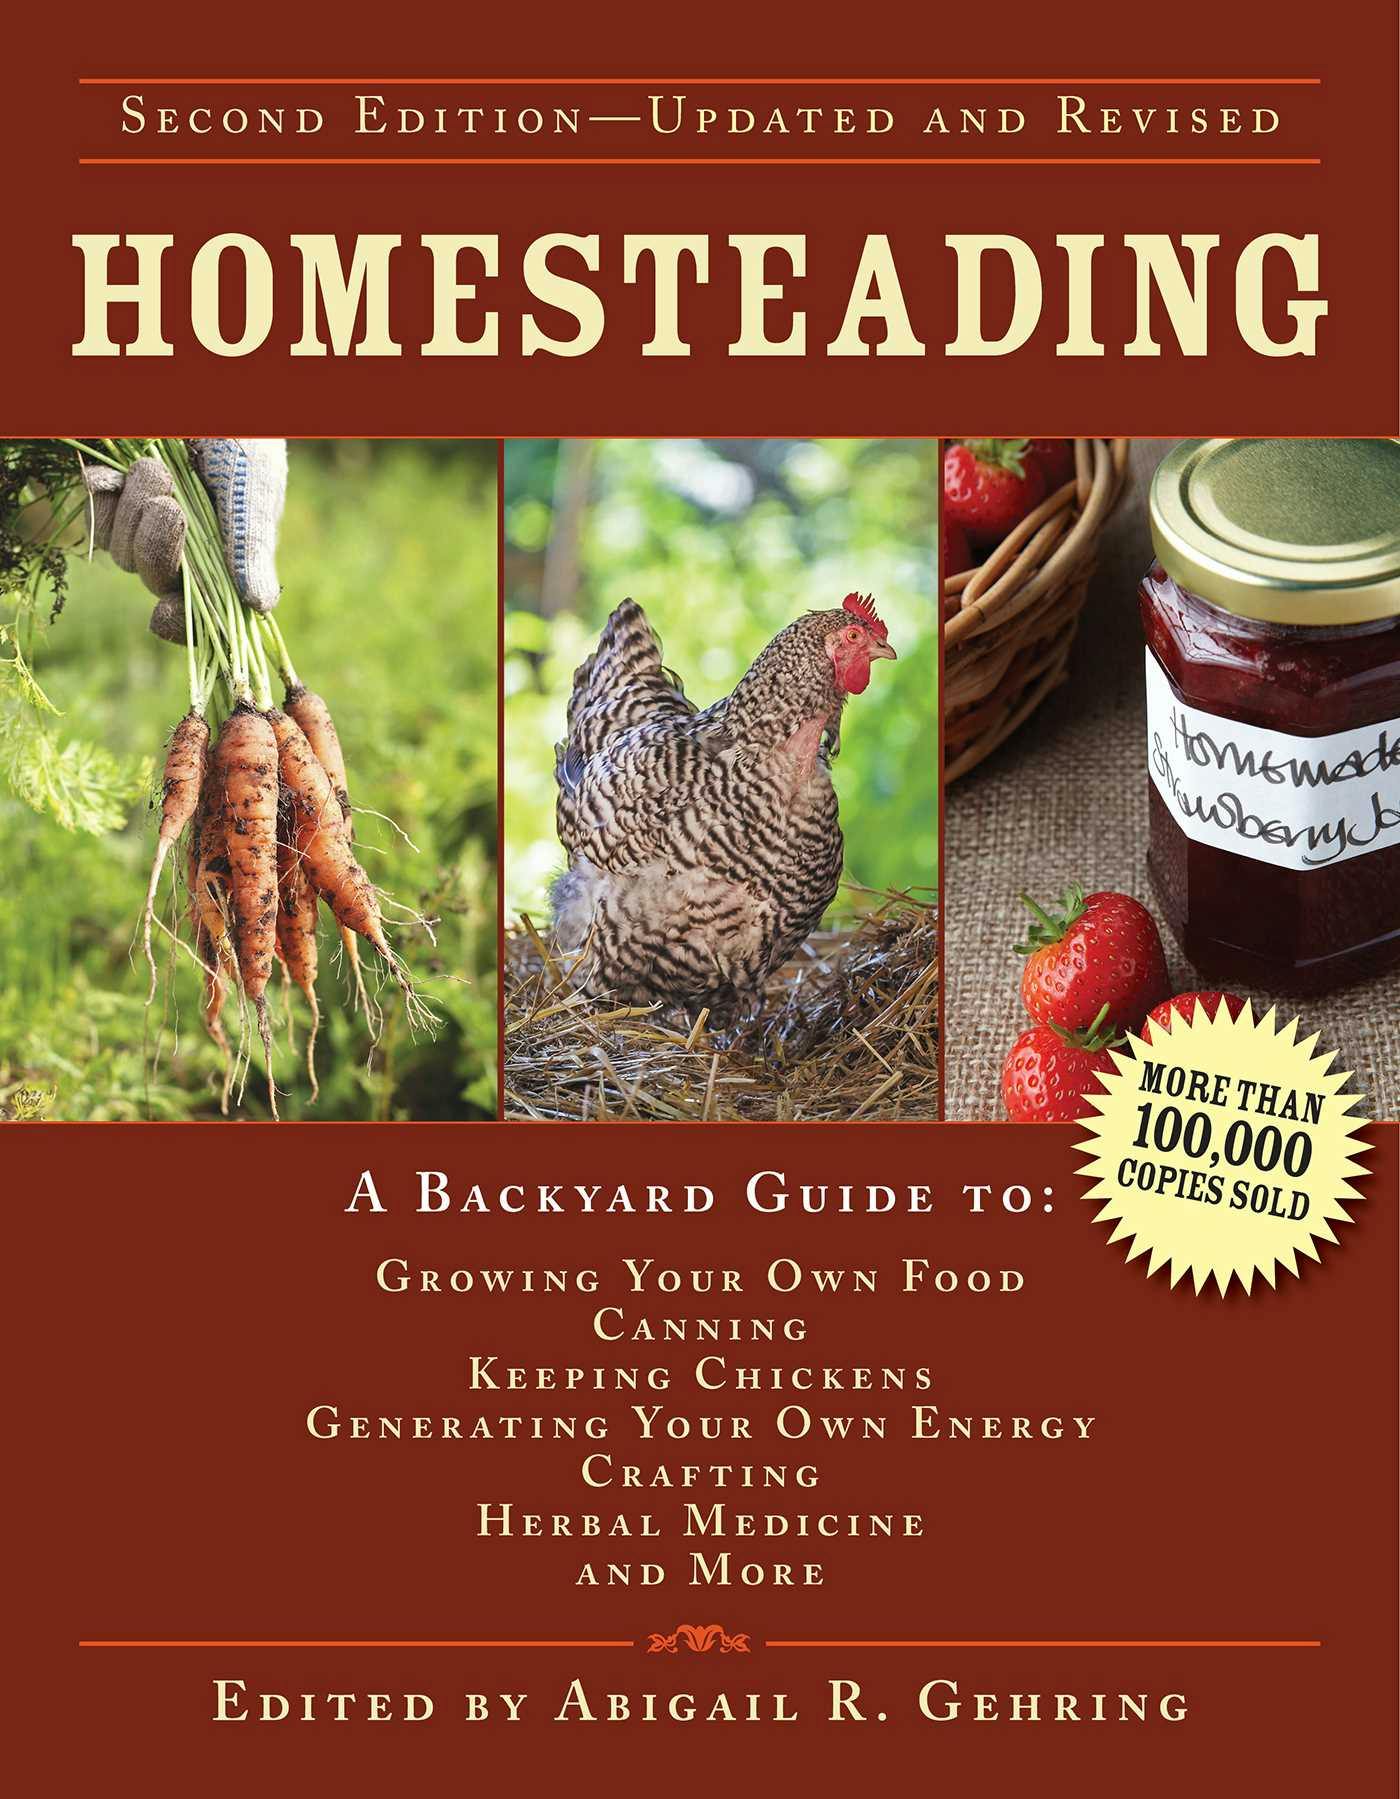 Homesteading: A Backyard Guide to Growing Your Own Food, Canning, Keeping Chickens, Generating Your Own Energy, Crafting, Herbal Medicine, and More - Abigail Gehring